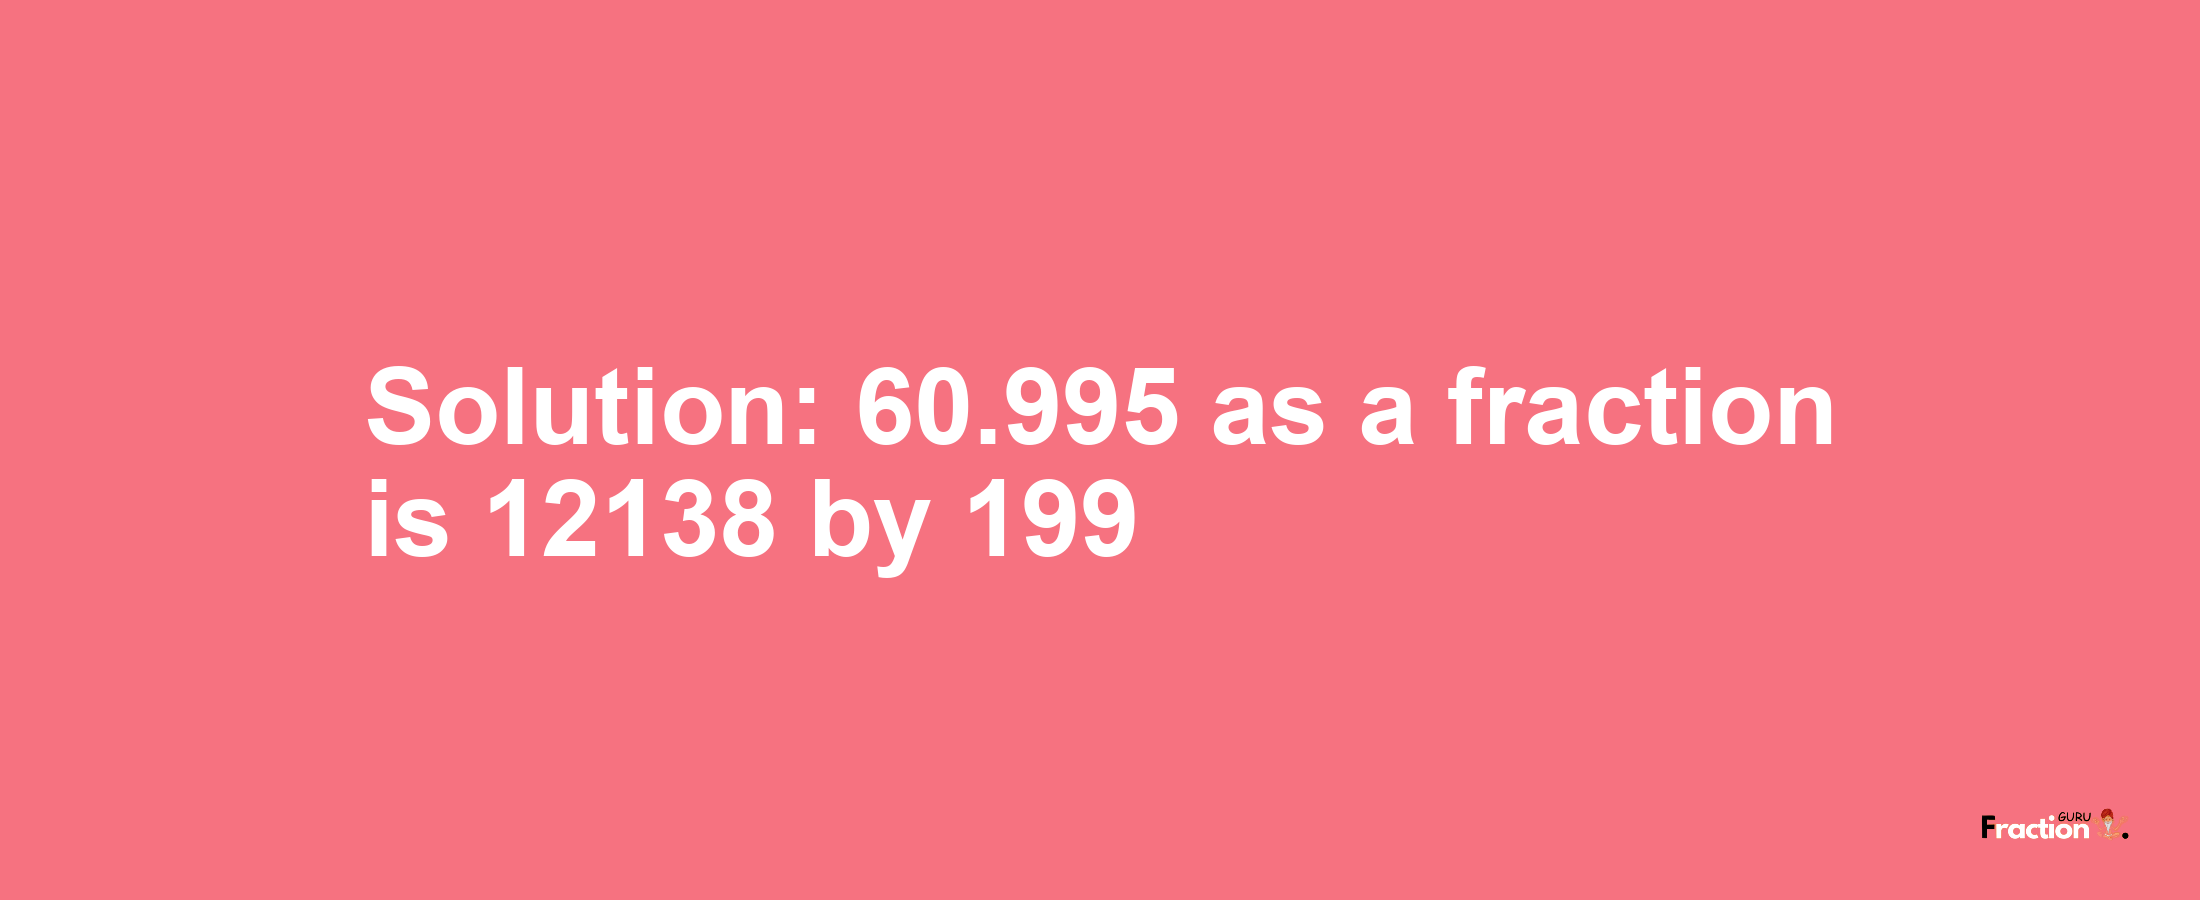 Solution:60.995 as a fraction is 12138/199